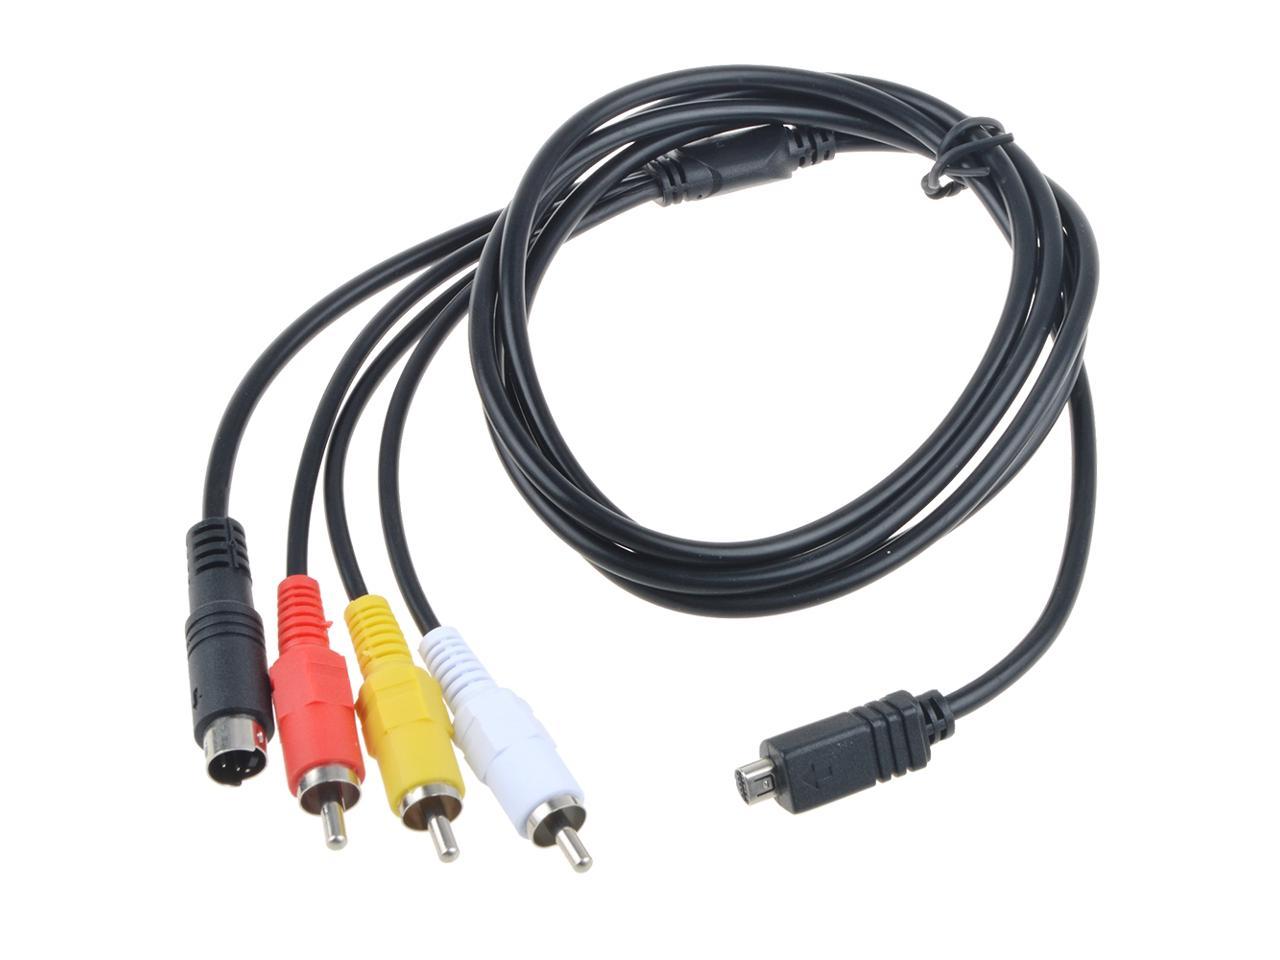 Durpower 3FT Firewire iLink 6-4 Pin DV Video Cable Cord Lead For Sony Camcorder DCR-HC52/e/k 